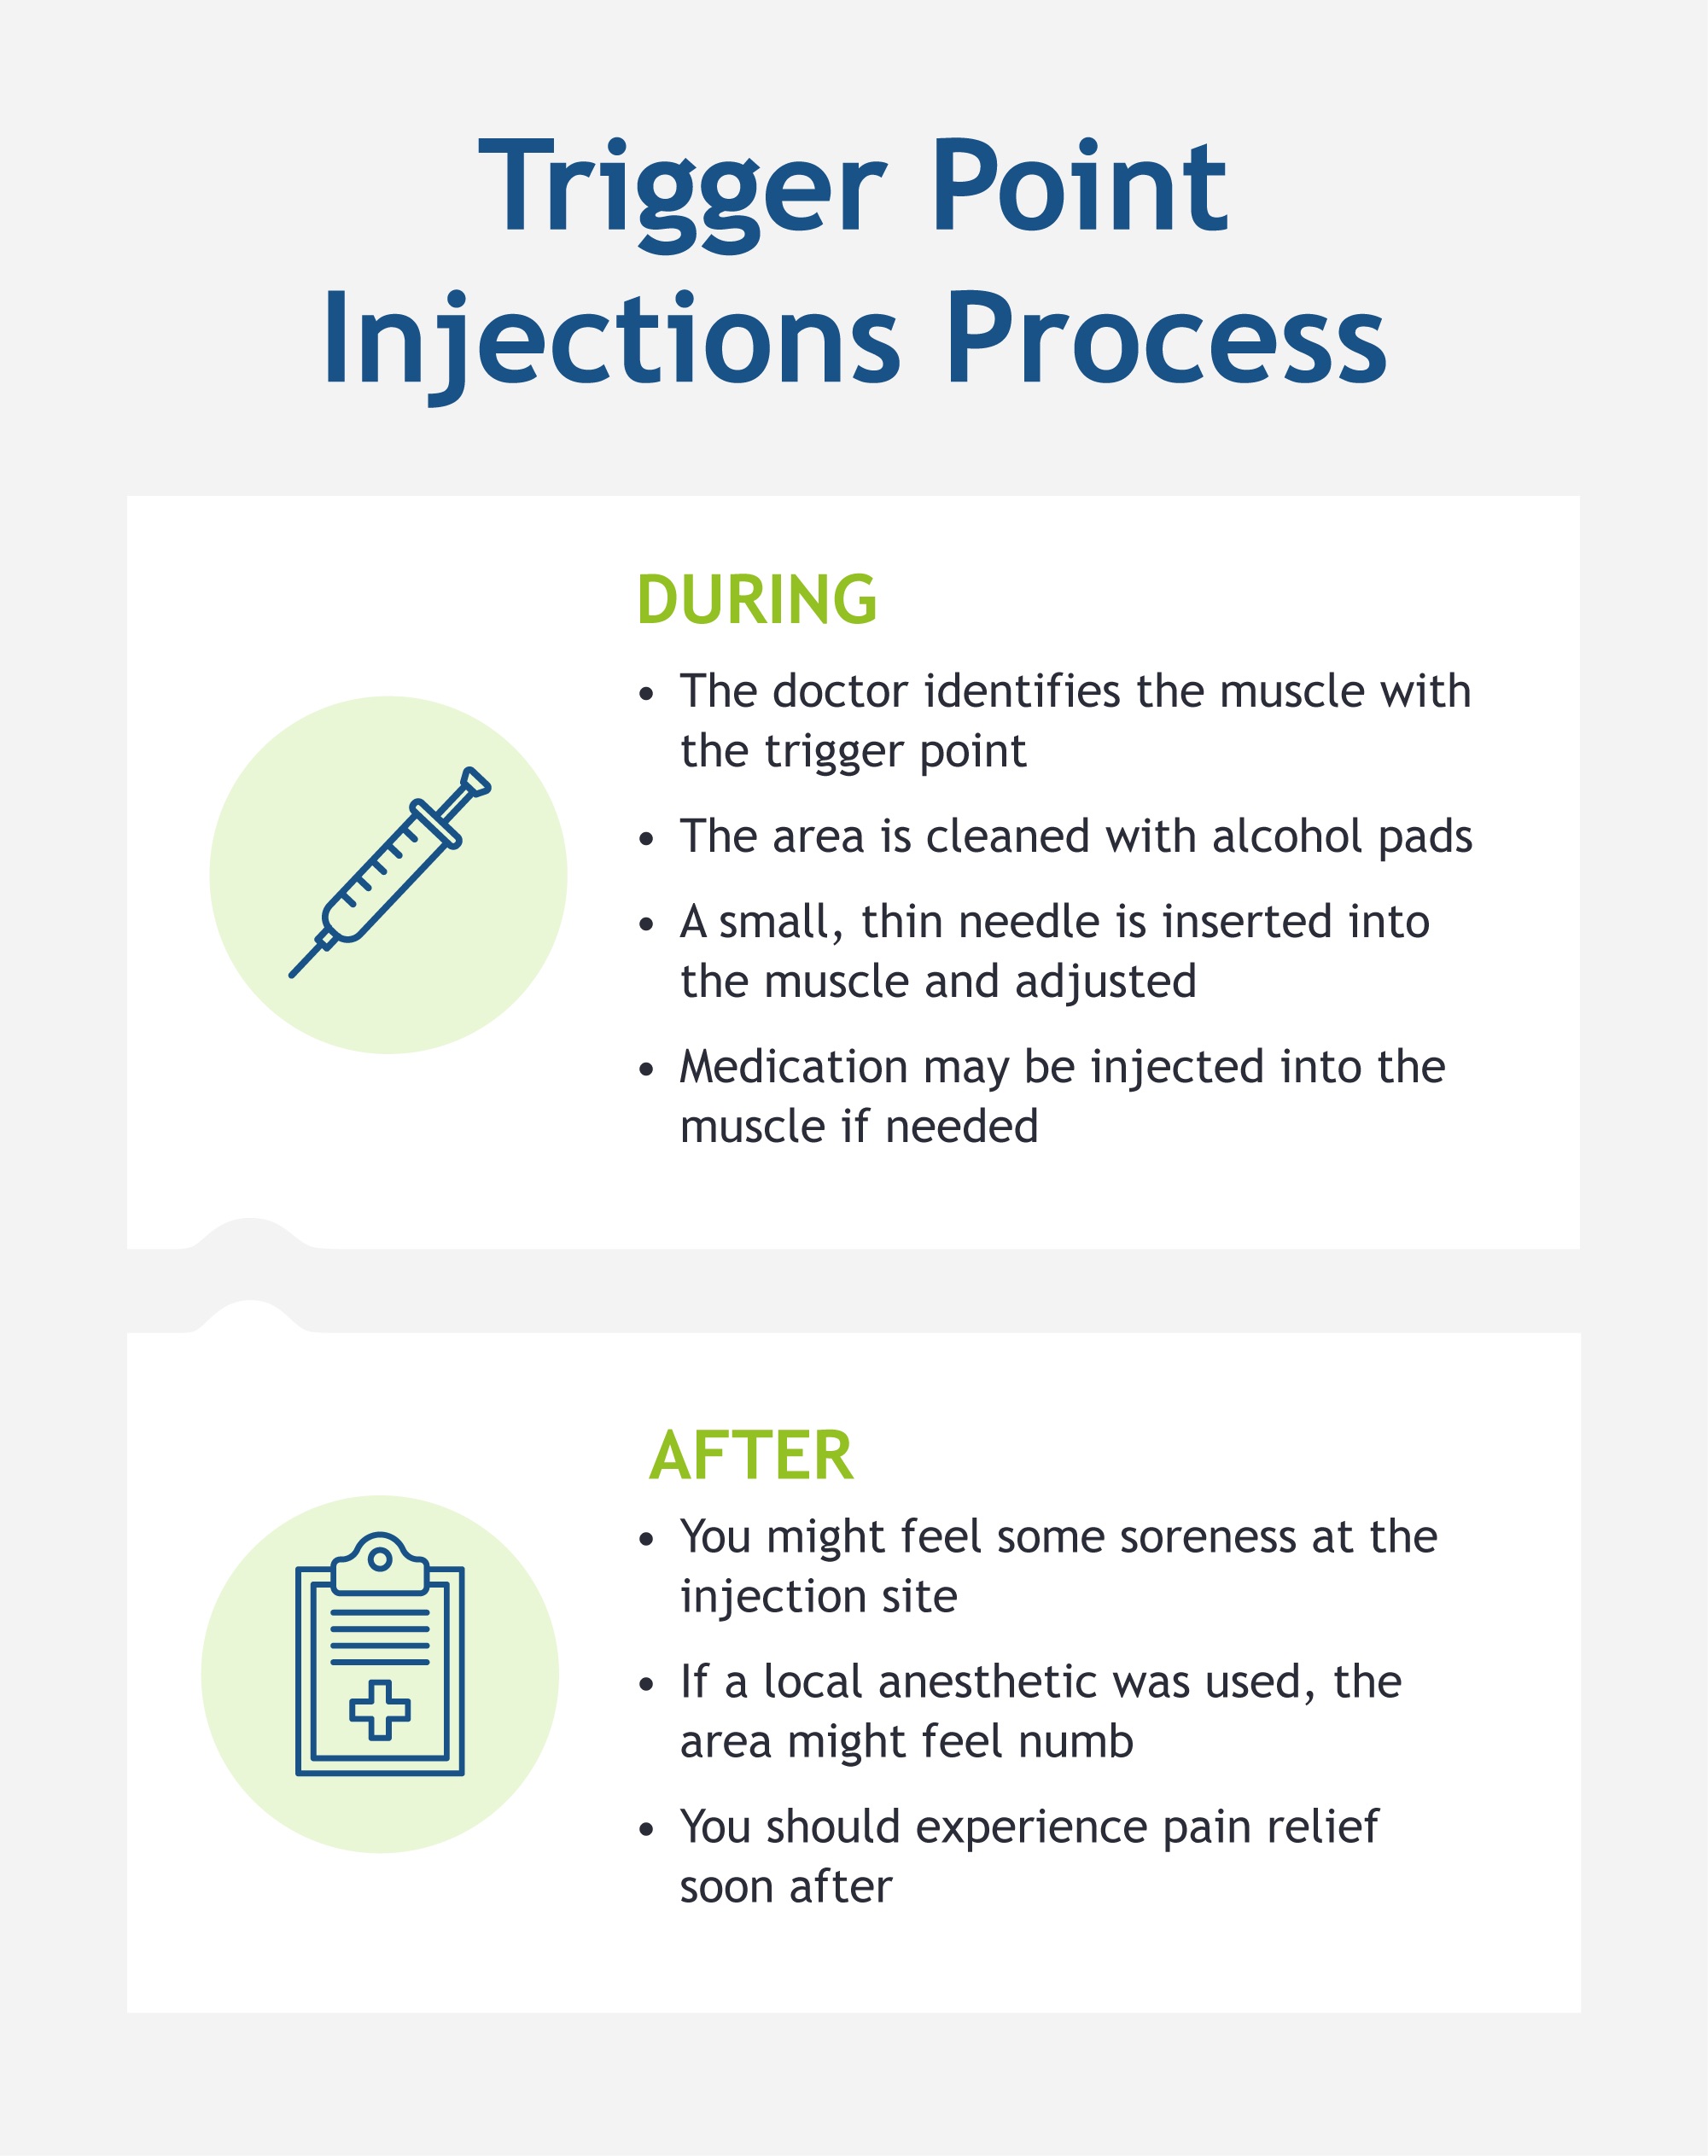 An infographic describing the trigger point injection process.